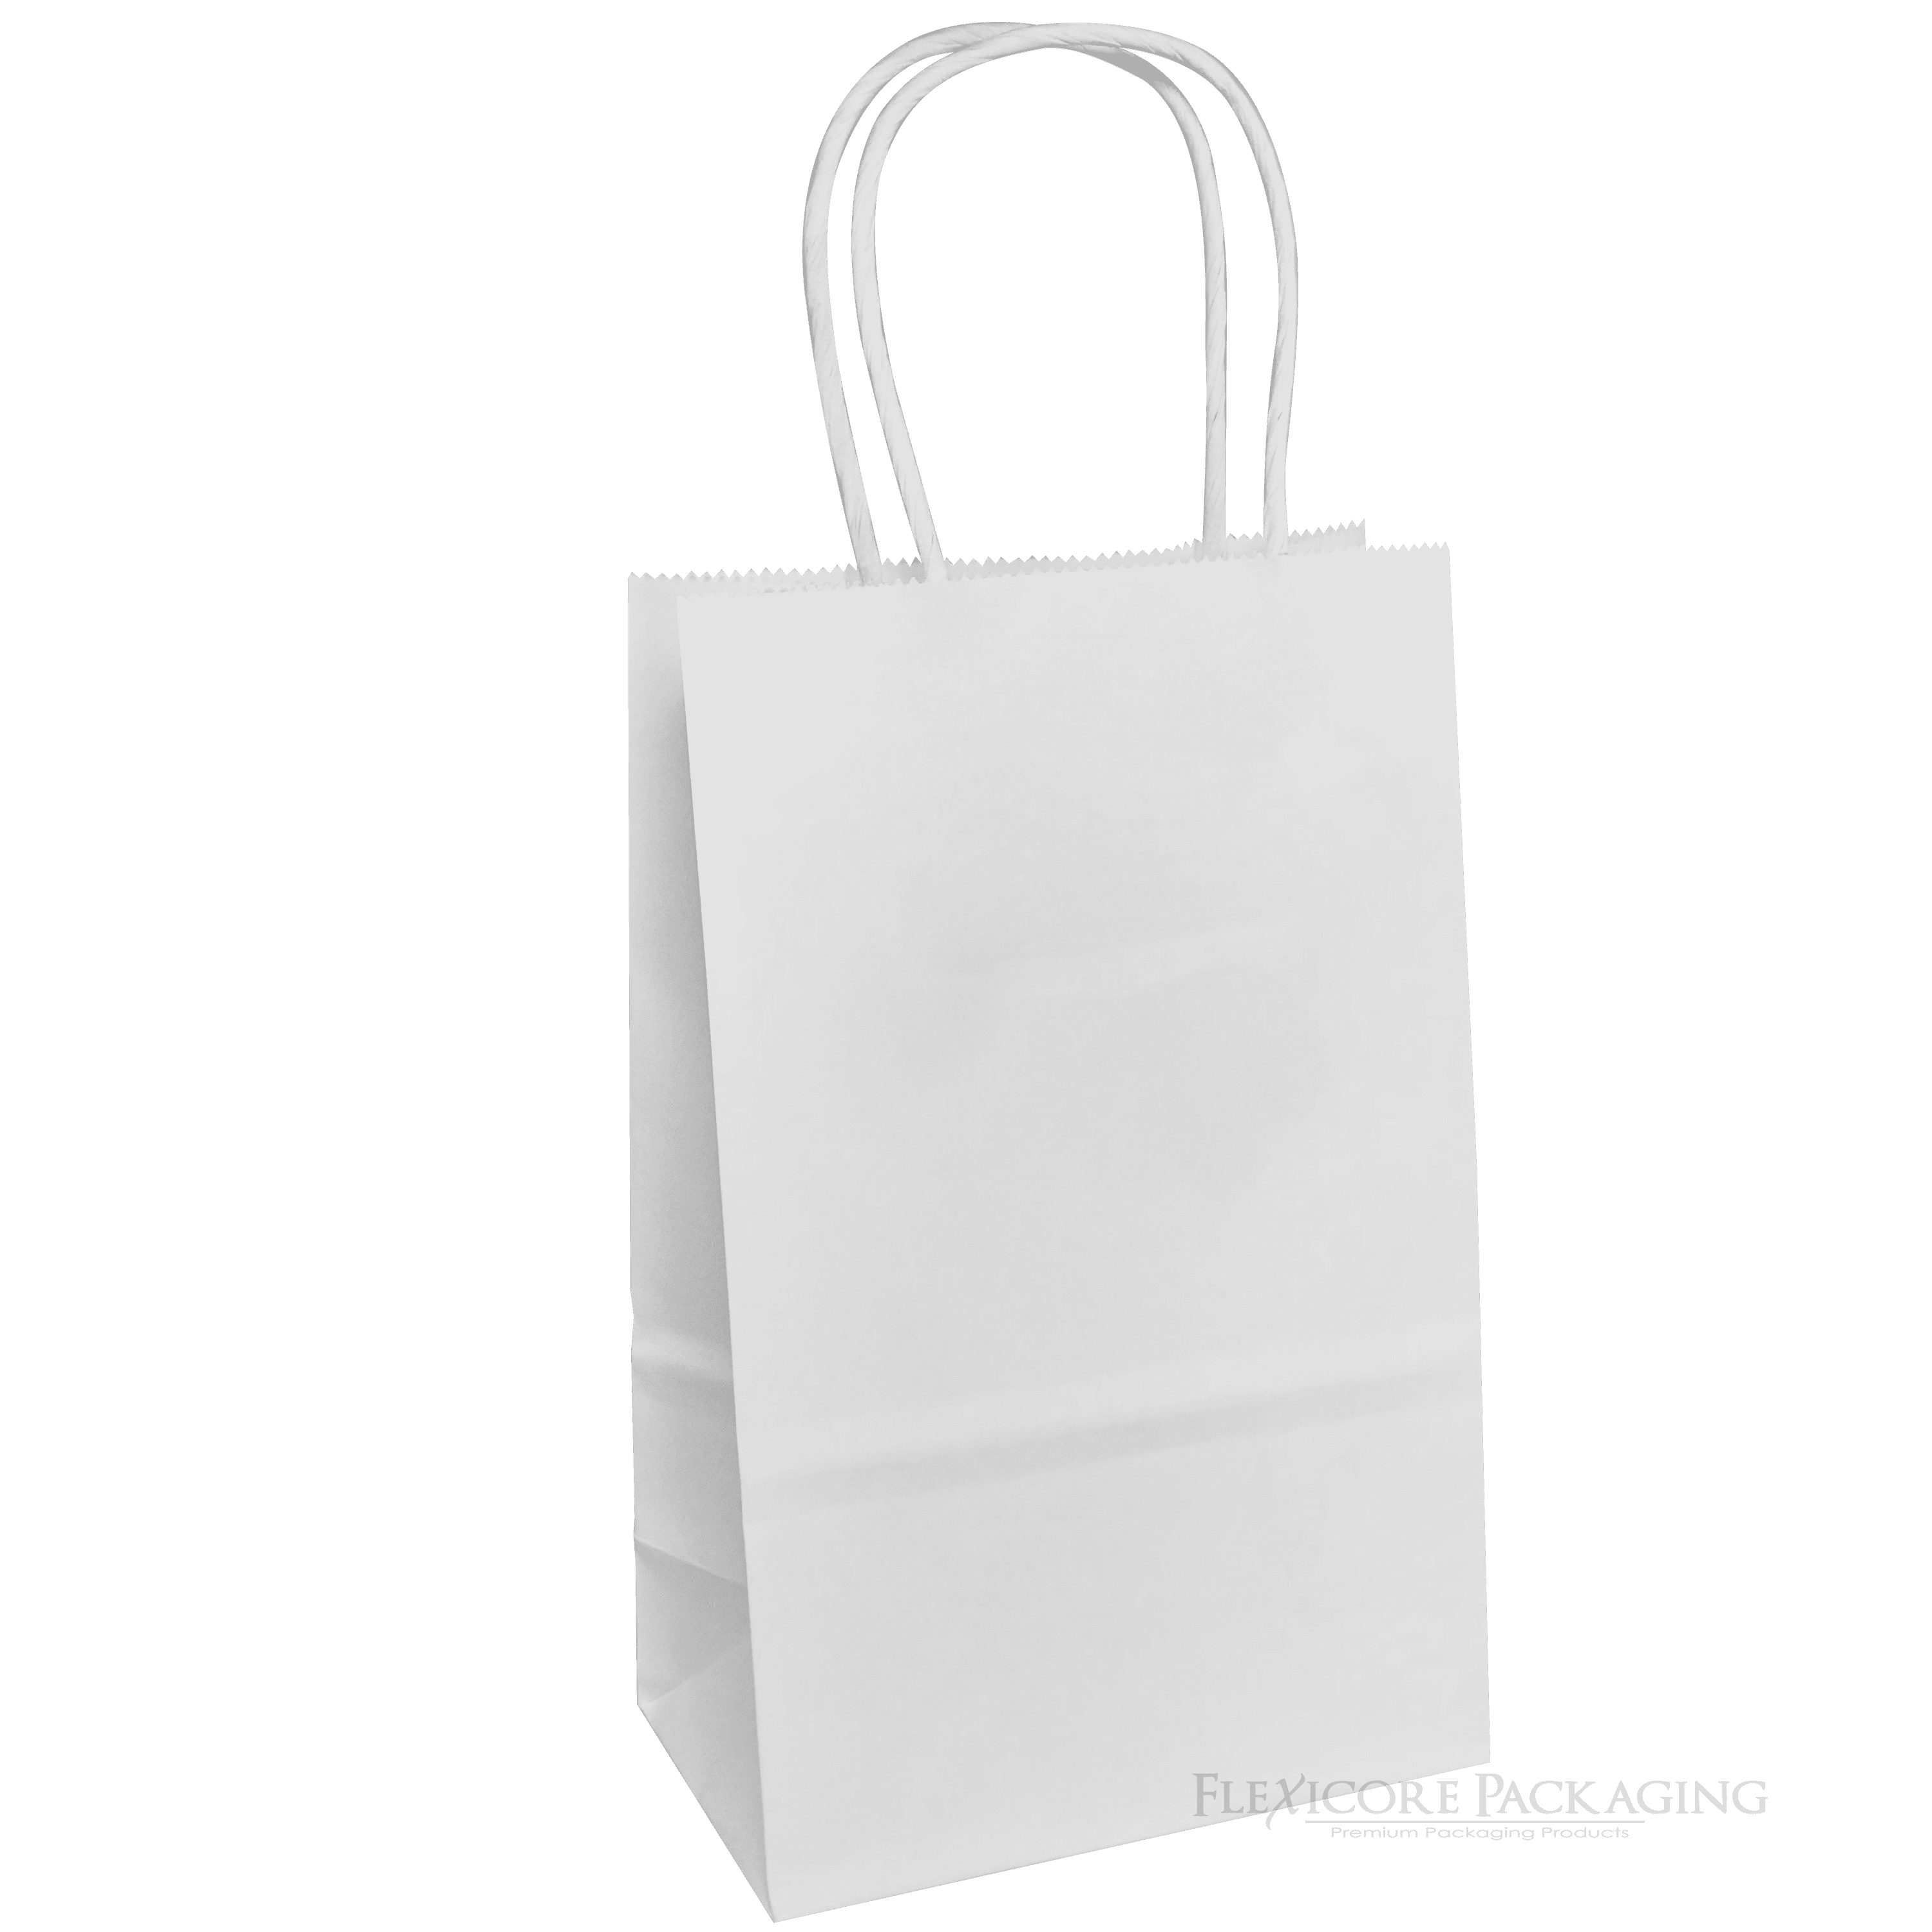 Strong White Greaseproof Paper Bags Food Kraft Grocery Gift Retail Shop 6"x 6" 